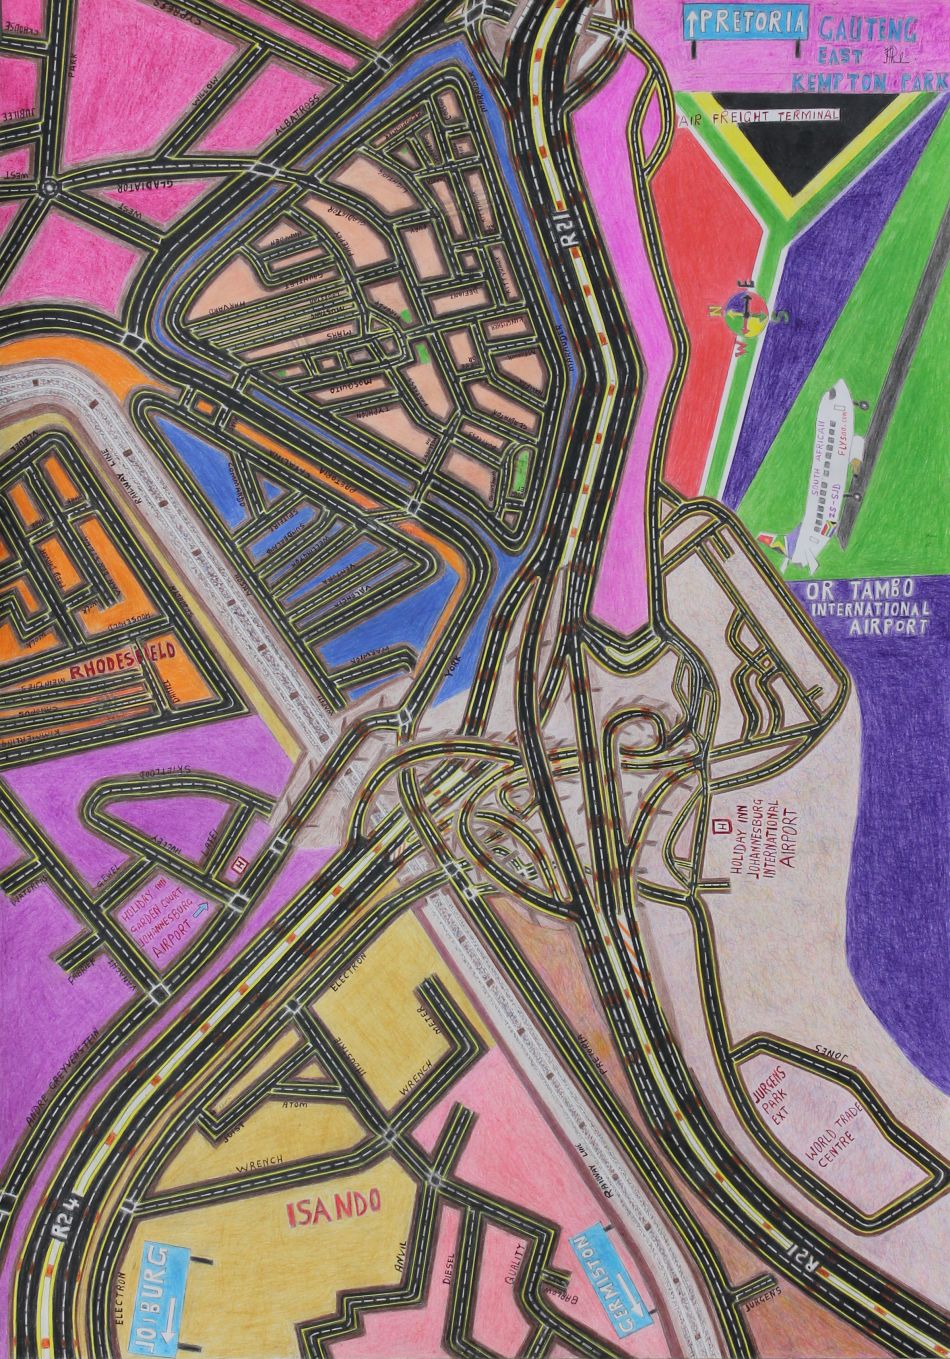 Click the image for a view of: Gauteng East, Kempton Park. 2013. Colour pencil on paper. 860X710mm